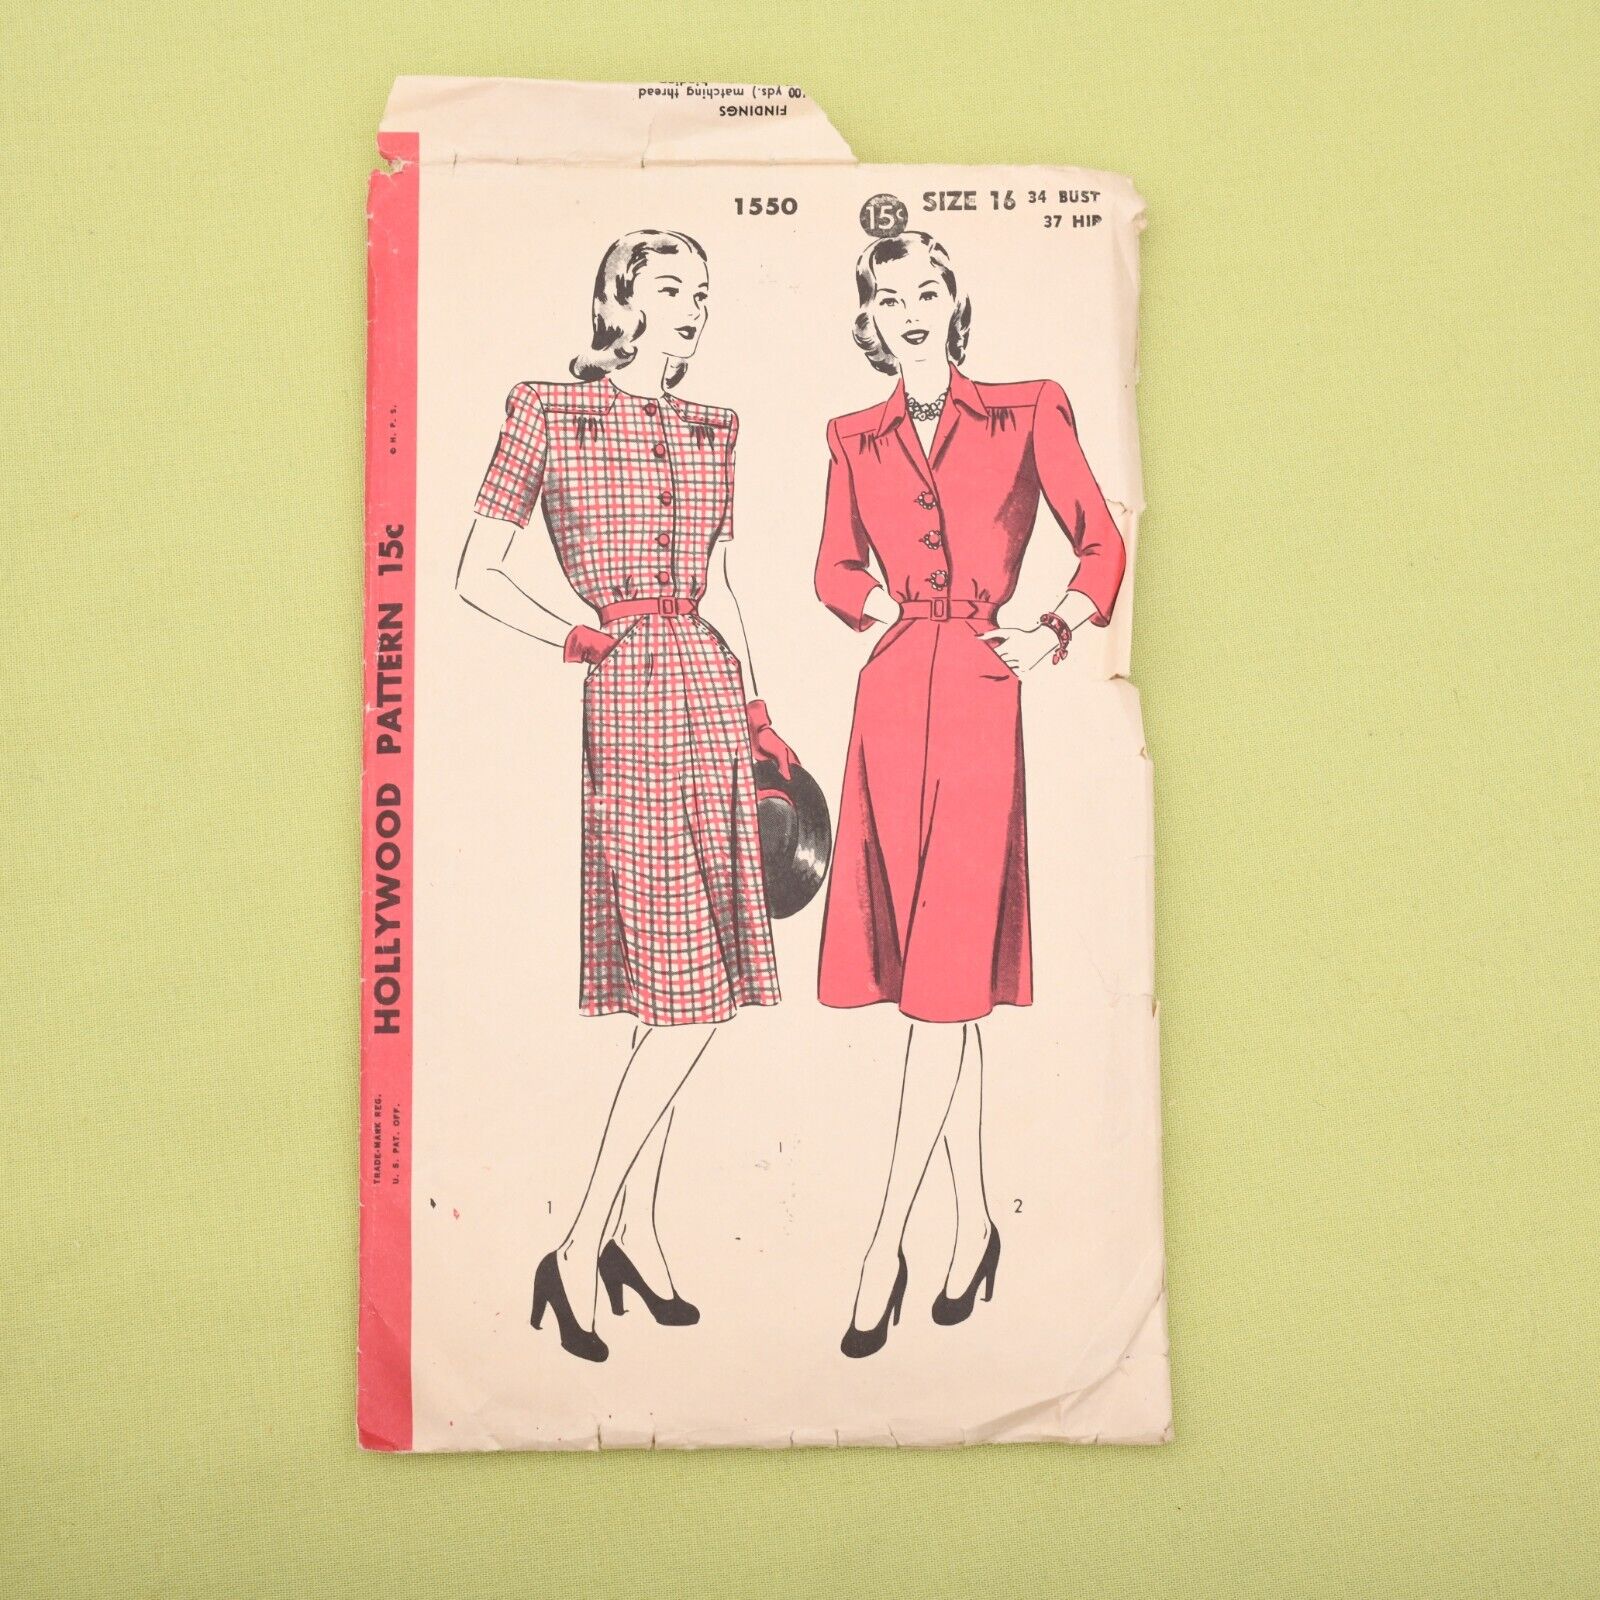 Vintage 1940s Hollywood One Piece Dress Sewing Pattern - 1550 - Bust 34 Complete